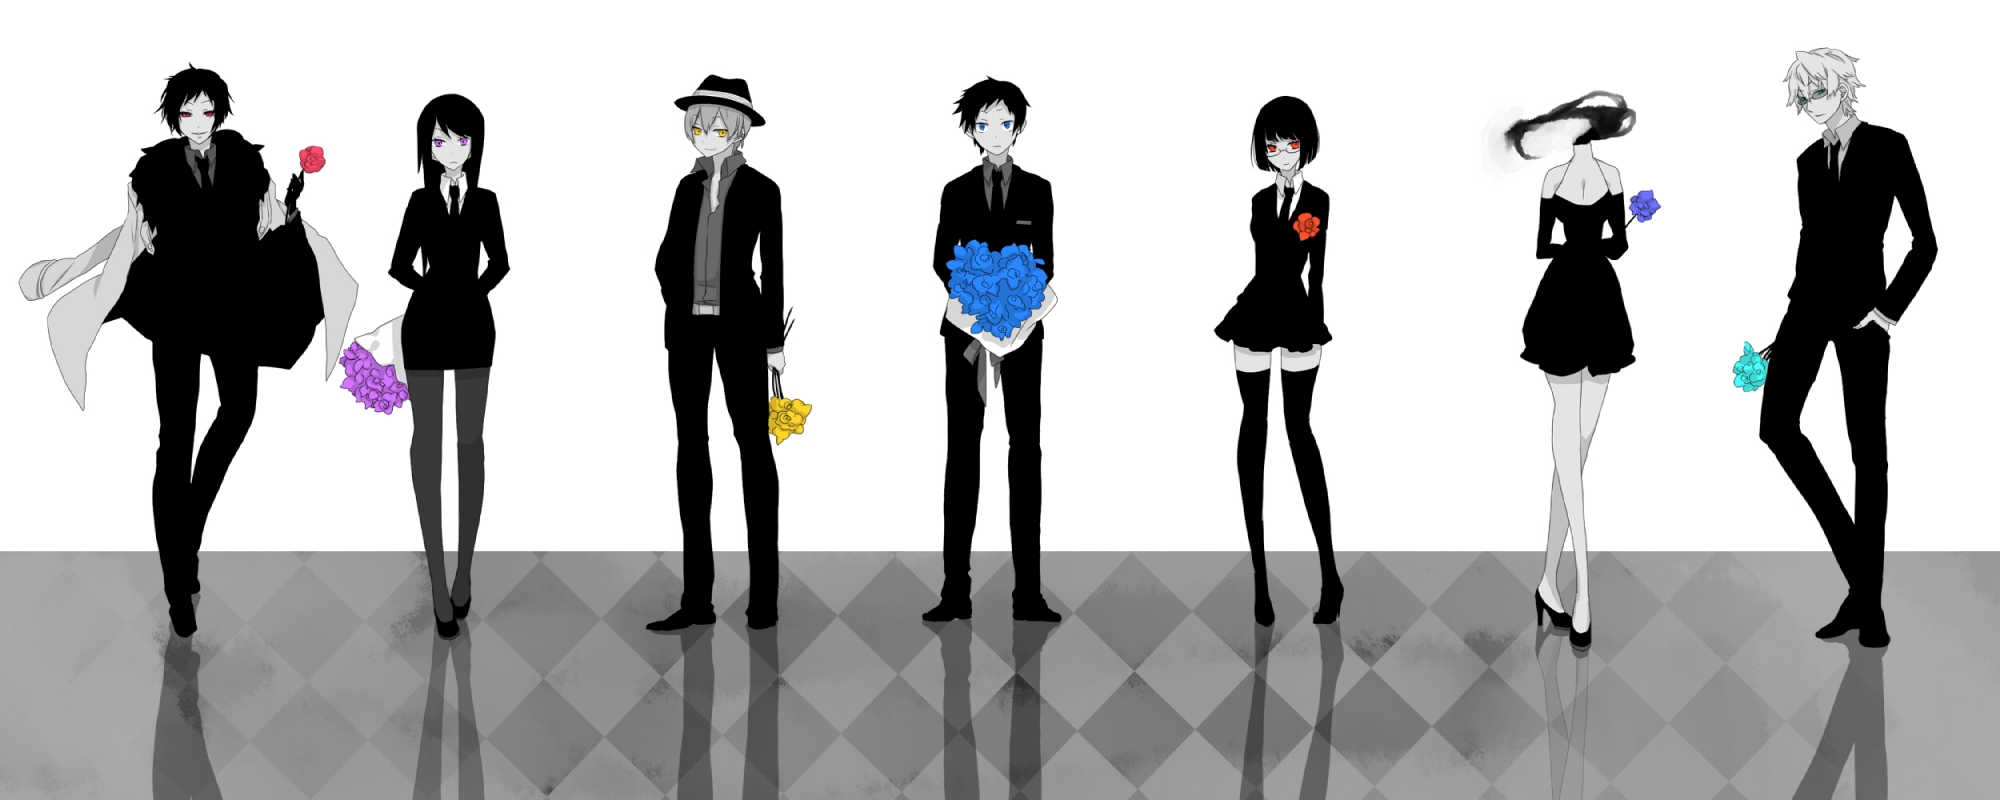 Durarara!! Anime Wallpaper. Vibrant cityscape with characters in cool outfits.